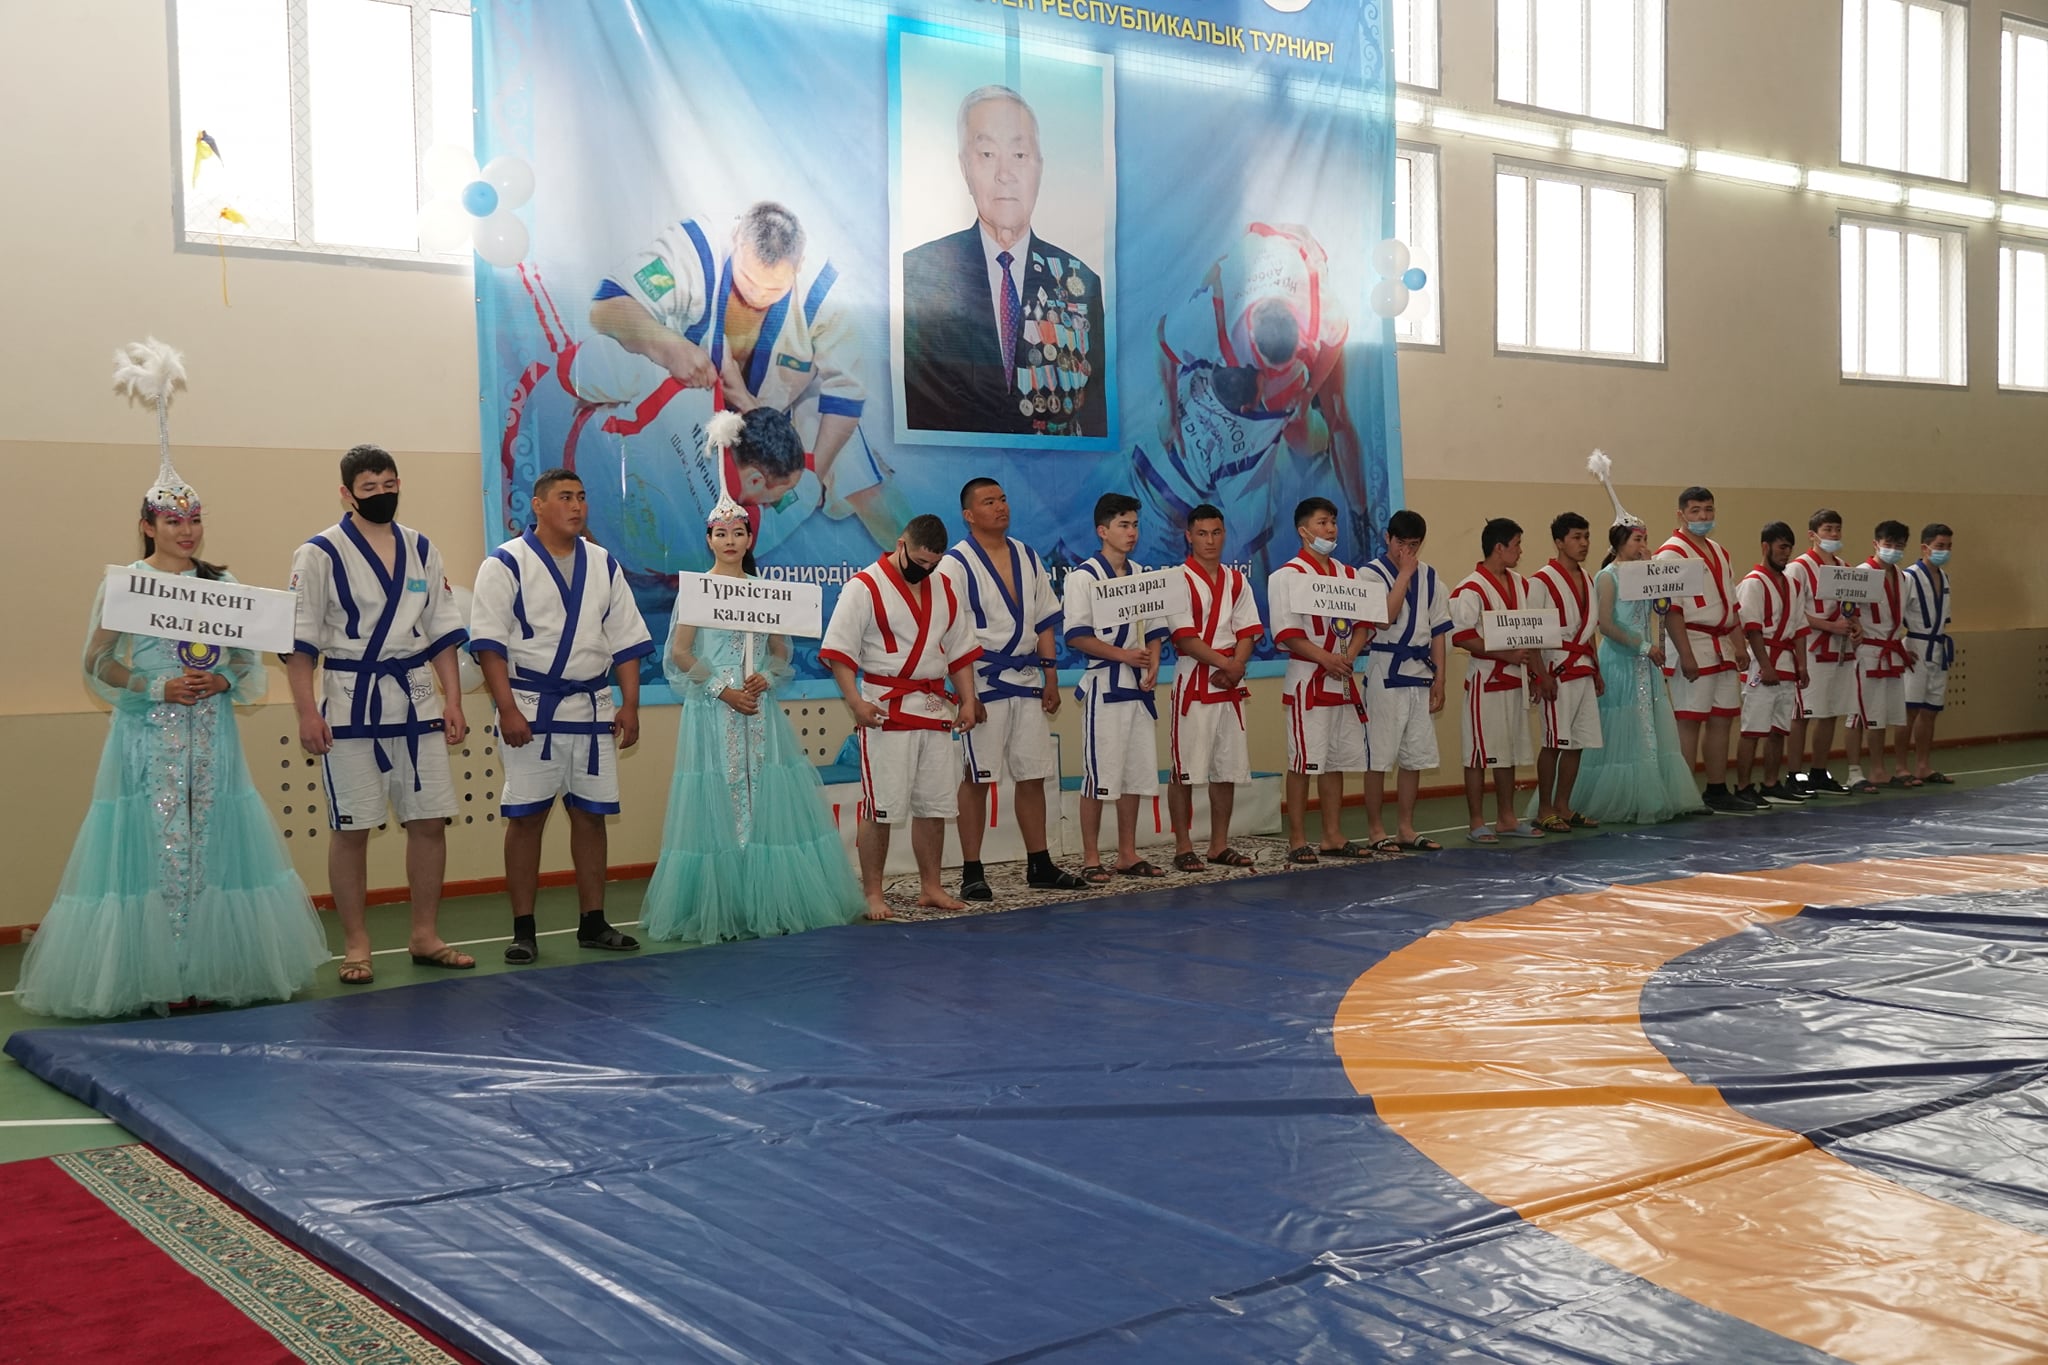 THE KAZAKH KURESI TOURNAMENT WAS HELD IN THE KELES DISTRICT